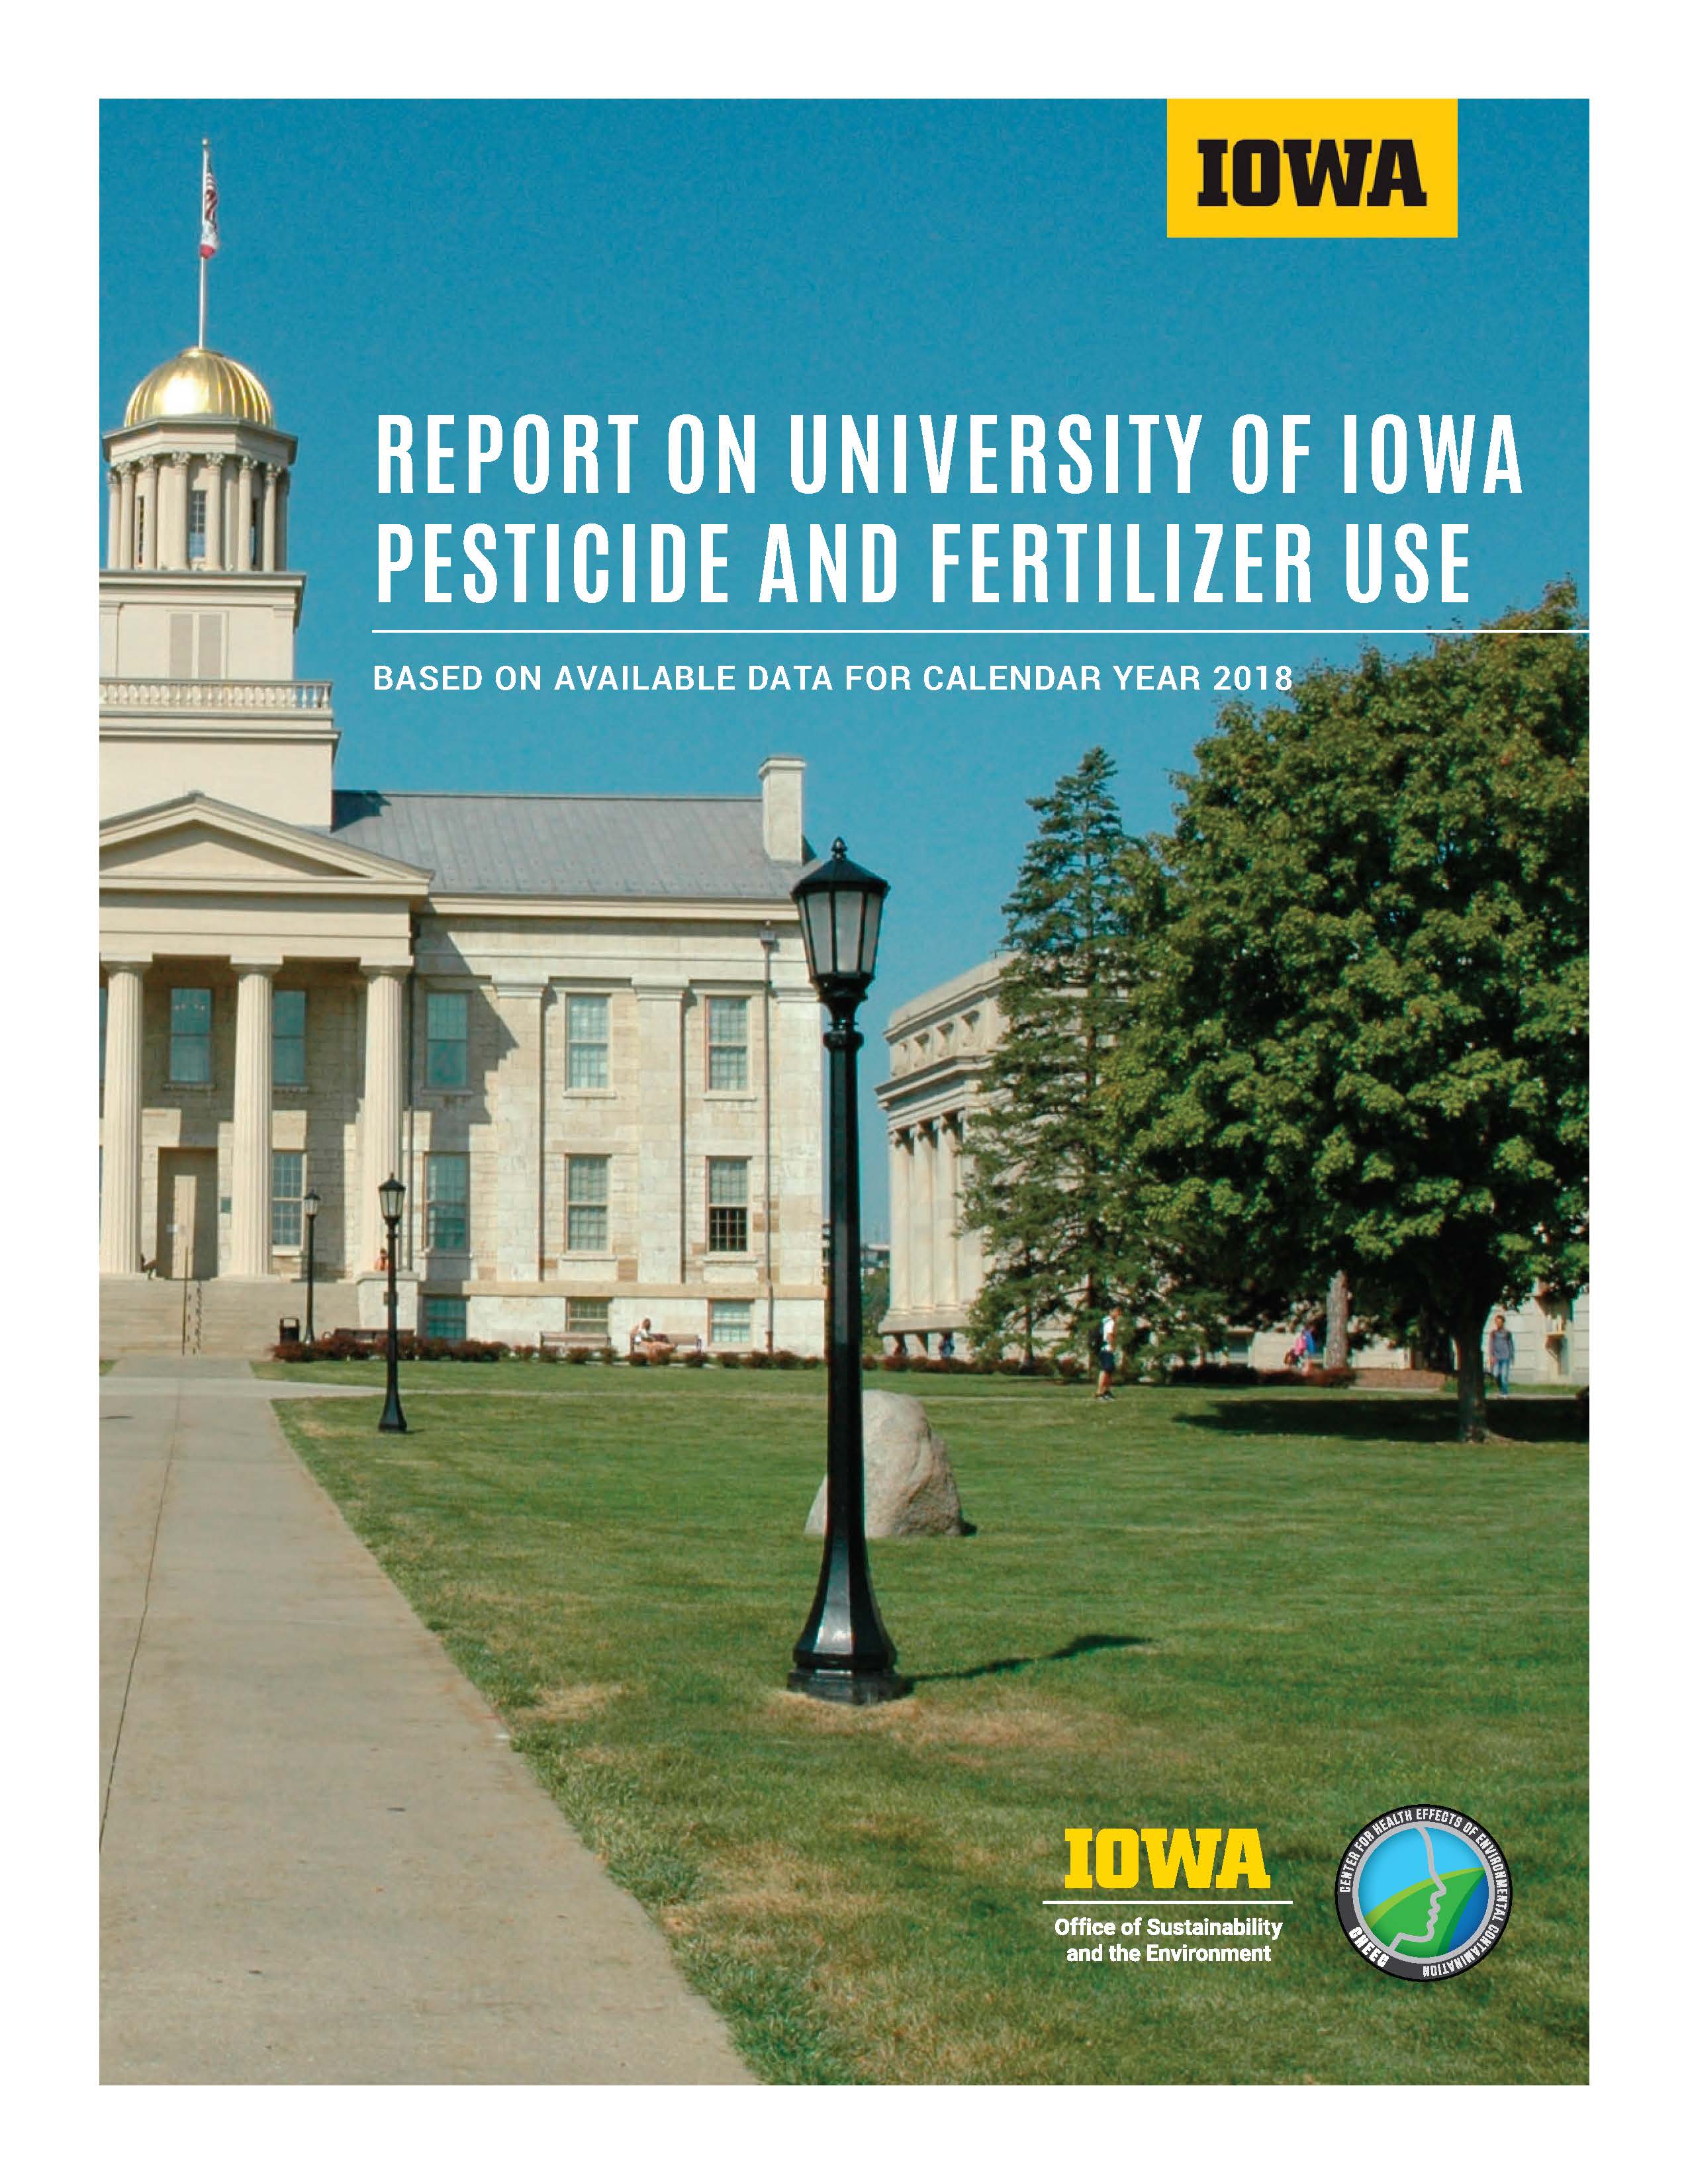 Title page of the Report on the University of Iowa Pesticide and Fertilizer Use